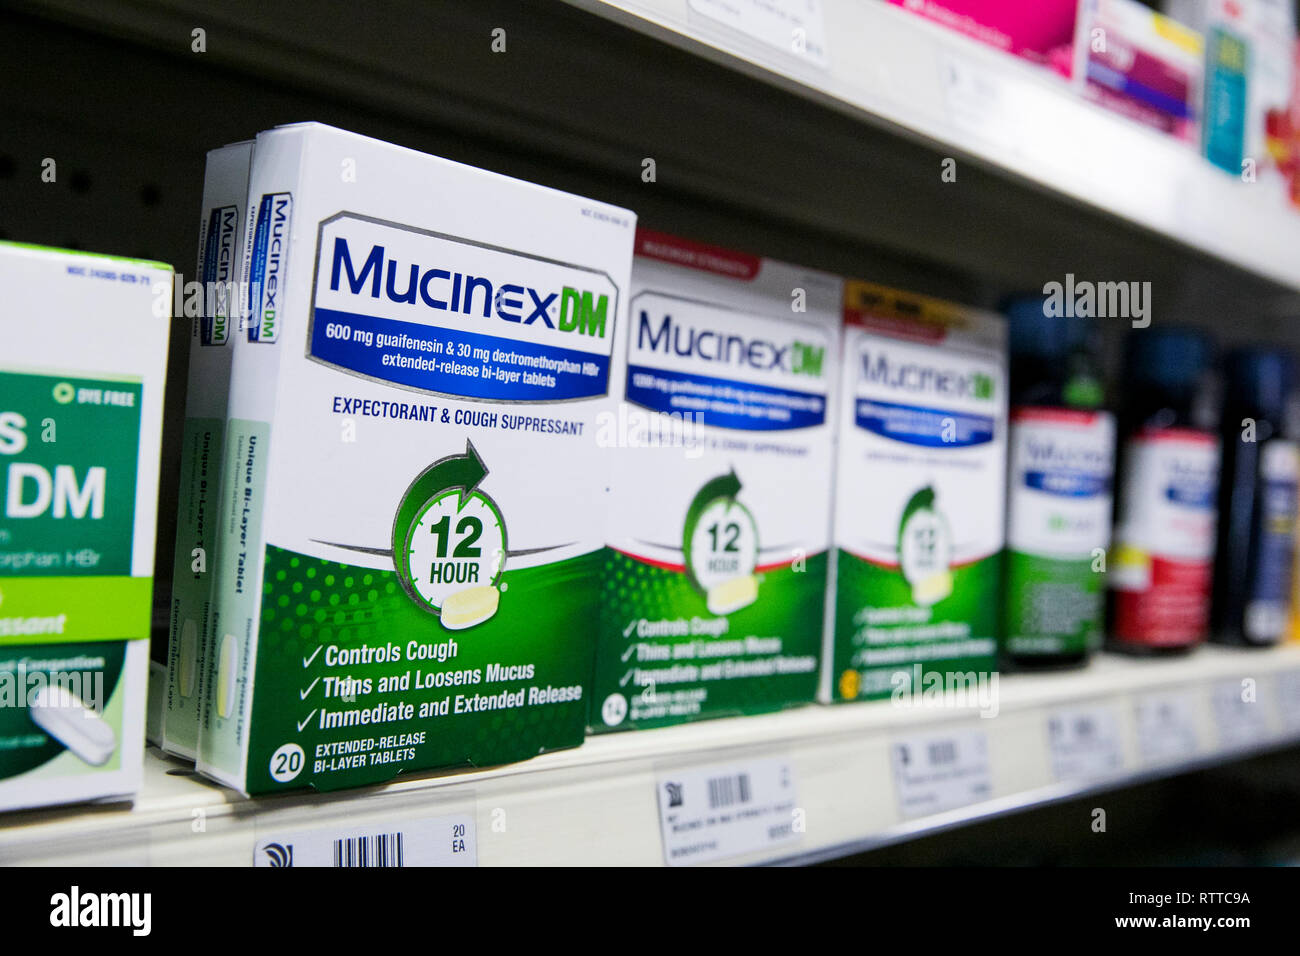 Mucinex DM over-the-counter cold medicine photographed in a pharmacy. Stock Photo